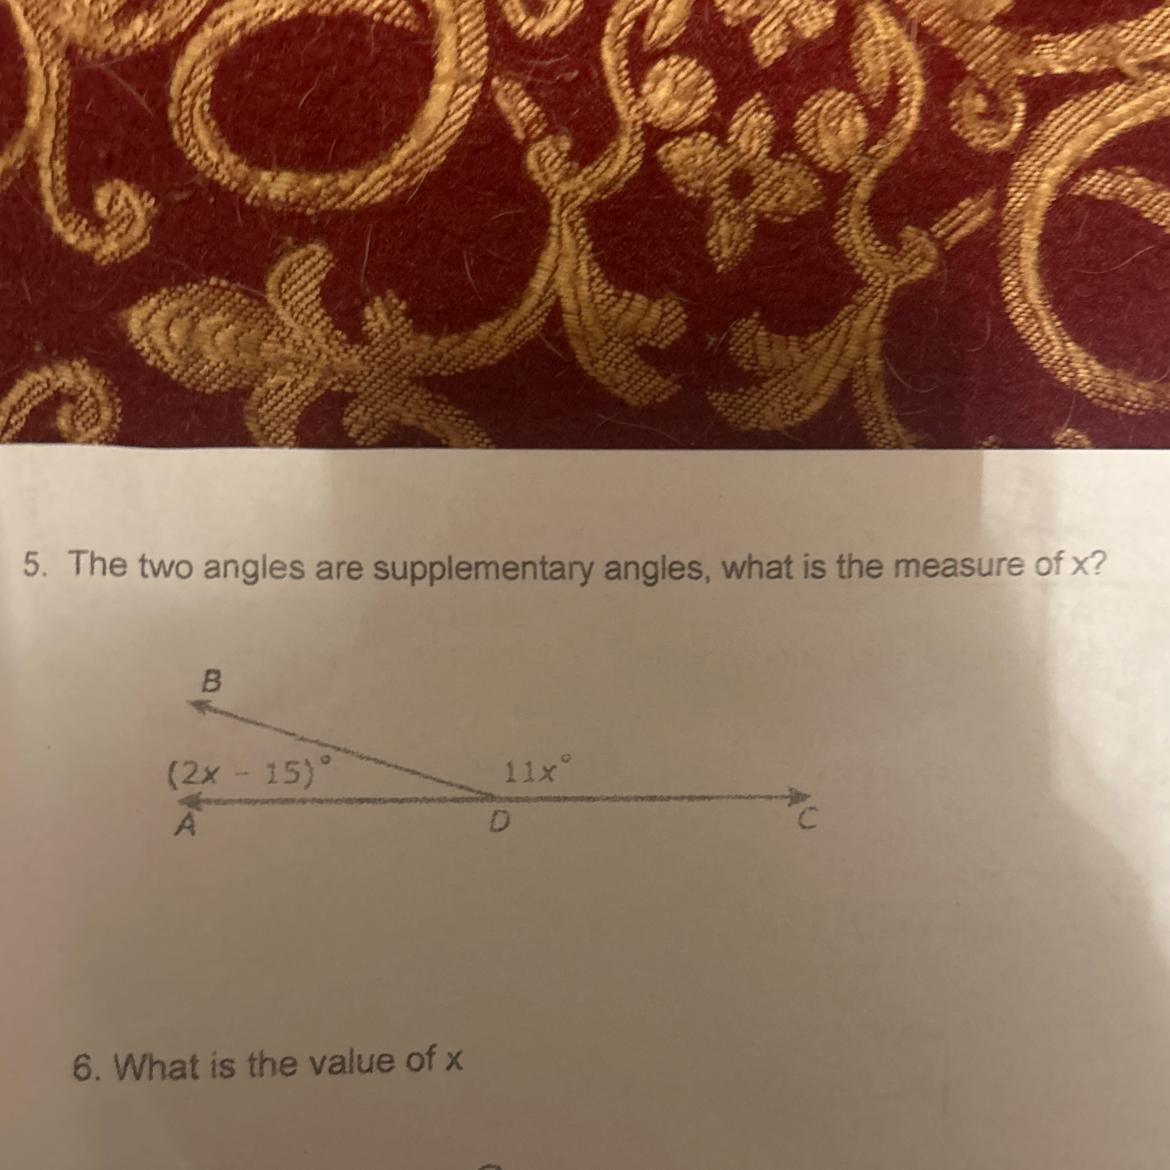 5. The Two Angles Are Supplementary Angles, What Is The Measure Of X?B(2x - 15)A11xDC